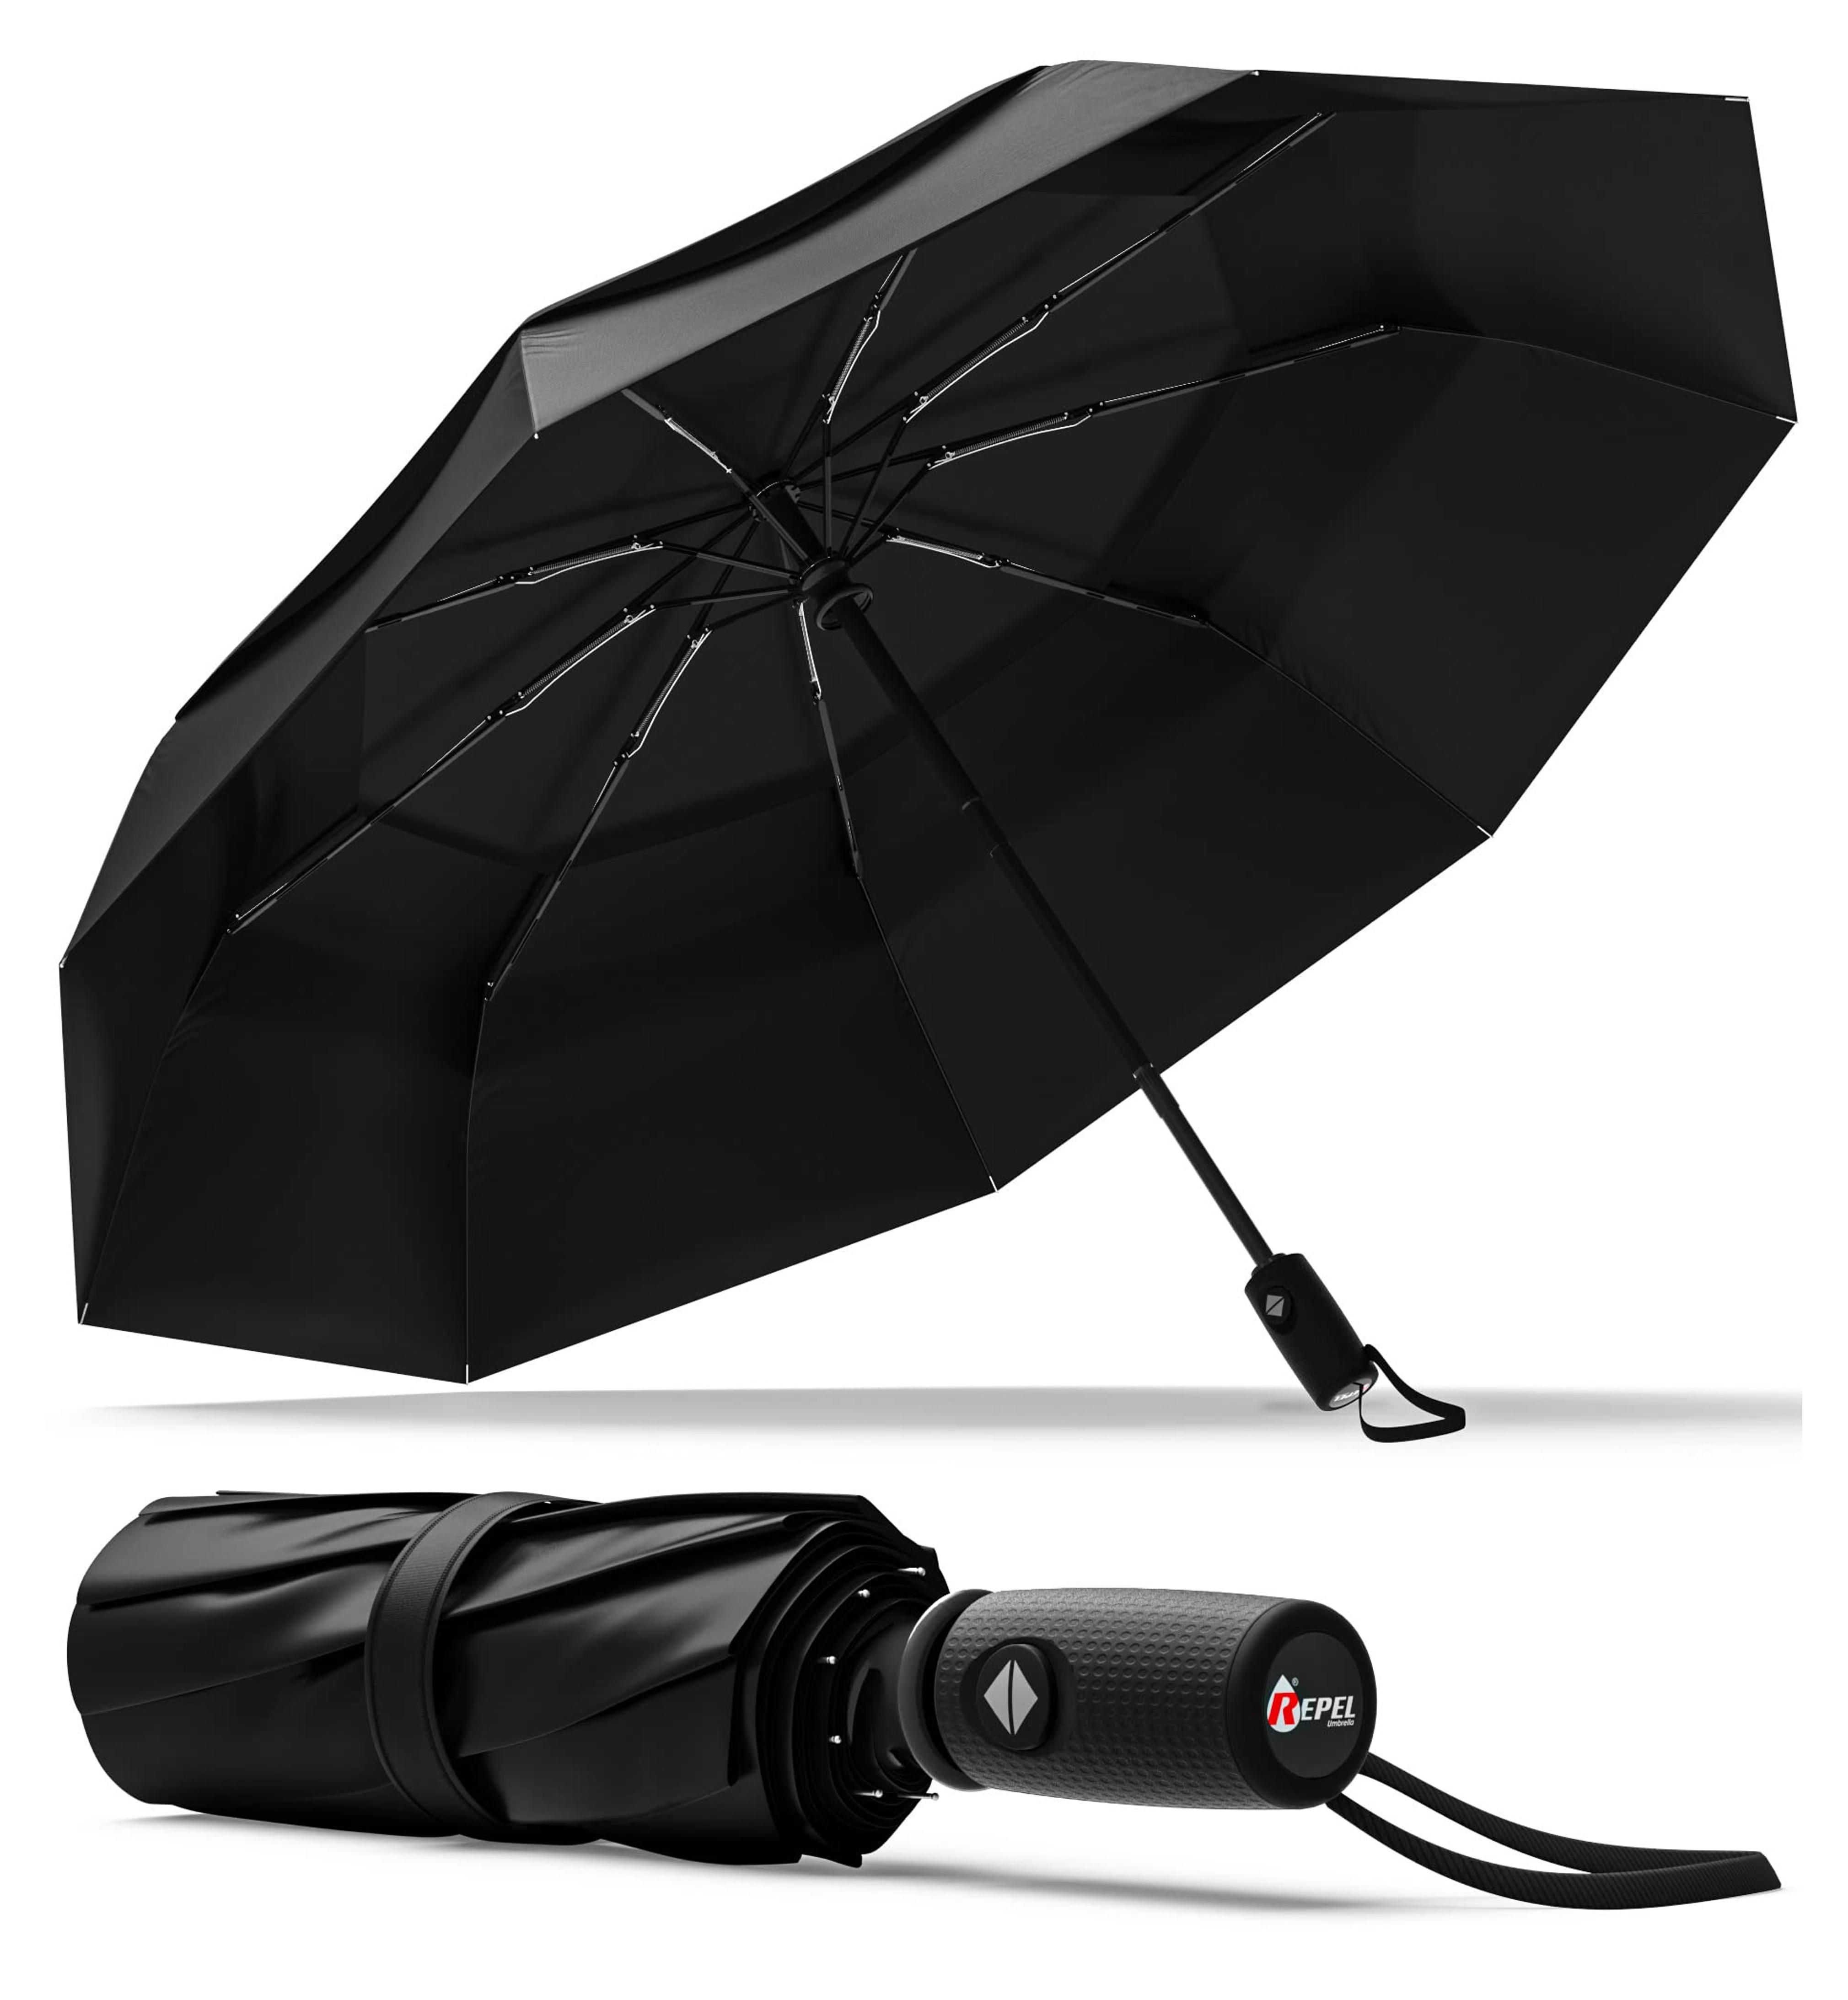 Amazon.com: Repel Umbrella Windproof Travel Umbrella - Wind Resistant, Small - Compact, Light, Automatic, Strong Steel Shaft, Mini, Folding and Portable - Backpack, Car, Purse Umbrellas for Rain - Men and Women : Clothing, Shoes & Jewelry